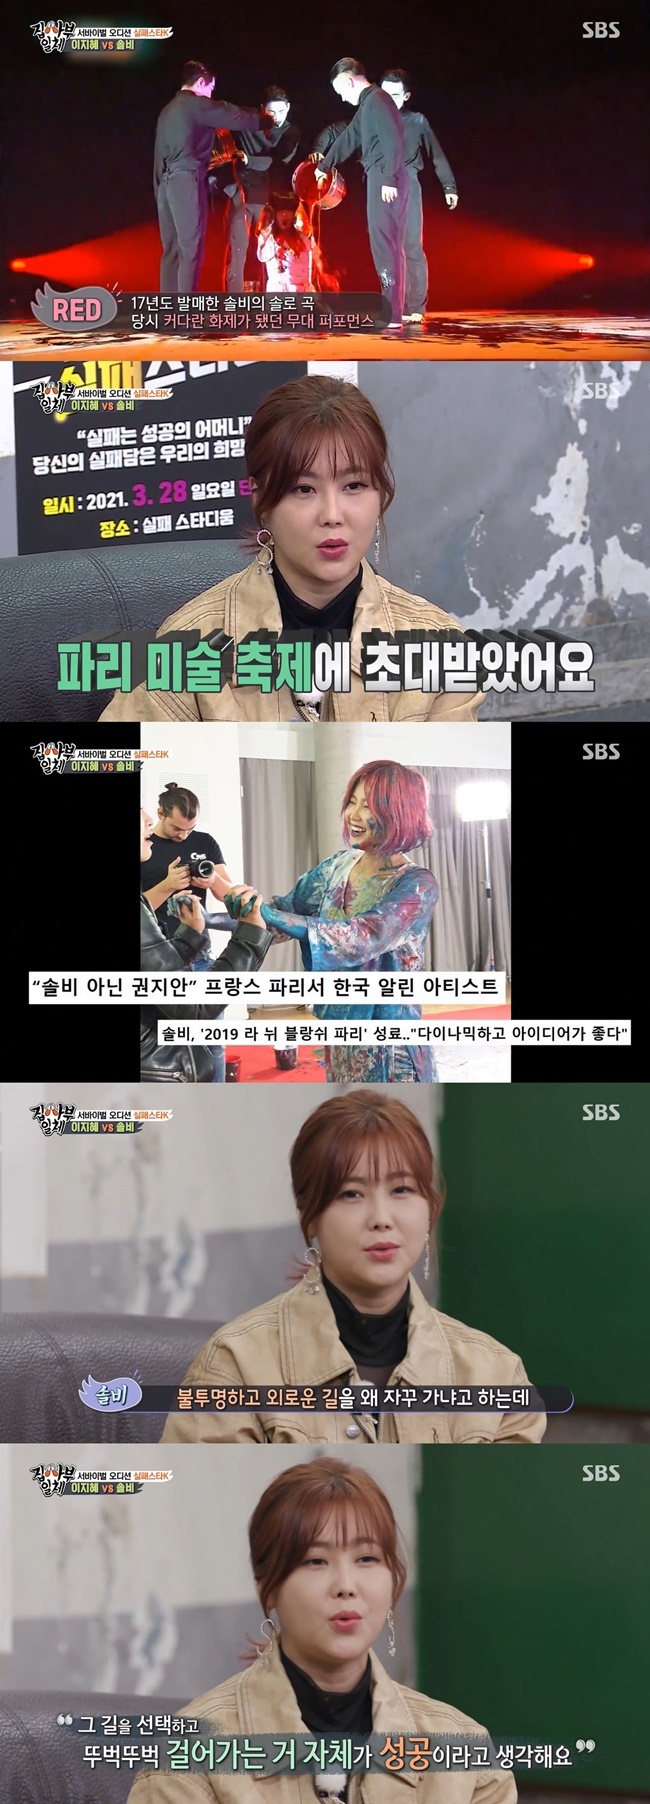 Solbi has graced the failure steebule with a genuine story.On March 21, SBS All The Butlers was a failure star K that started to select participants for Failure Stival.Those who appeared with the story of failure on this day were Shim Soo Chang, Broadcaster Park Sung Ho, Lee Jin Hyo, Kim Yong Myung, singer Lee Ji Hye and Solbi.Among them, Solbi said, I was ruined as a singer because of my agency. However, due to failure, I was able to create the present Author Solbi.Solbi then mentioned the release process of 12 solo albums, and Tak Jae-hoon said, I remember how I applied paint on the stage.Solbi has gathered topics in 2017 by showing paint performance on the stage of the song RED.Solbi said, At that time, I was very insulted, but I was invited to the Paris Modern Art History Festival through it. It was a great opportunity.Solbi also told the seven-year unknown Actor, who tells me about his failure, People tell me why I am Art history, why do you keep going on an opaque and lonely road? I think it is a success to walk with Choices already.I do not have a defined future, but it is unclear, but if I love it and my own reason is clear, I think my life has succeeded even if it is not a social success.Solbi made his debut as a mixed group typoon in 2006 and worked until 2010.Solbi, who has been a solo singer since the team disbanded, has become a regular entertainer and has become familiar with him as an entertainer rather than a singer.Also, a white chime tag was attached to him in the appearance of a somewhat strange and pure Solbi.Solbi, who left the broadcasting company for a while, came back to the public again, not as a singer or entertainer, but as Author Solbi.It was art that comforted Solbi, who had suffered from slump and depression due to his long life in the entertainment industry.But despite the new Solbi look, some public have given his art an undesirable look.Solbi appeared on TVN Uquiz on the Block and said, Some people say Why do you draw it? I hate my majors.There was also noise in this process.Solbi released a unique-looking Cake that seemed to have kneaded clay with a hashtag called #HyundaiArt HistoryCake at the end of last year, saying, This Cake has been made in my own way.Since then, Solbis Cake has been controversial for plagiarism, saying it is similar to the pop artist Jeff Bridges Coons.Solbi posted a video of himself eating Cake, inserting the phrase Just a Cake, Seoul (just Cake, Seoul) and voice to replace the answer with performance that misunderstood pop The Artist Andy Warhol.Solbi said that the Cake was a reinterpretation of Jeff Bridges Coons Play - Doh in the first place, and Solbi expressed it as a metaphorical clue as my own way and Hyundai Art HistoryCake.At that time, Solbis plagiarism of Cake was heated, but he continued his work without any response.On March 18, Solbis agency, M.A.P.Crue, said, Solbis work Just a Cake - Angel was awarded at 10.1 million won after 49 competitions, starting at the Seoul Auction auction, which was closed the day before.Solbis bold Choices head-on over the Cake series that caused an untimely plagiarism controversy.